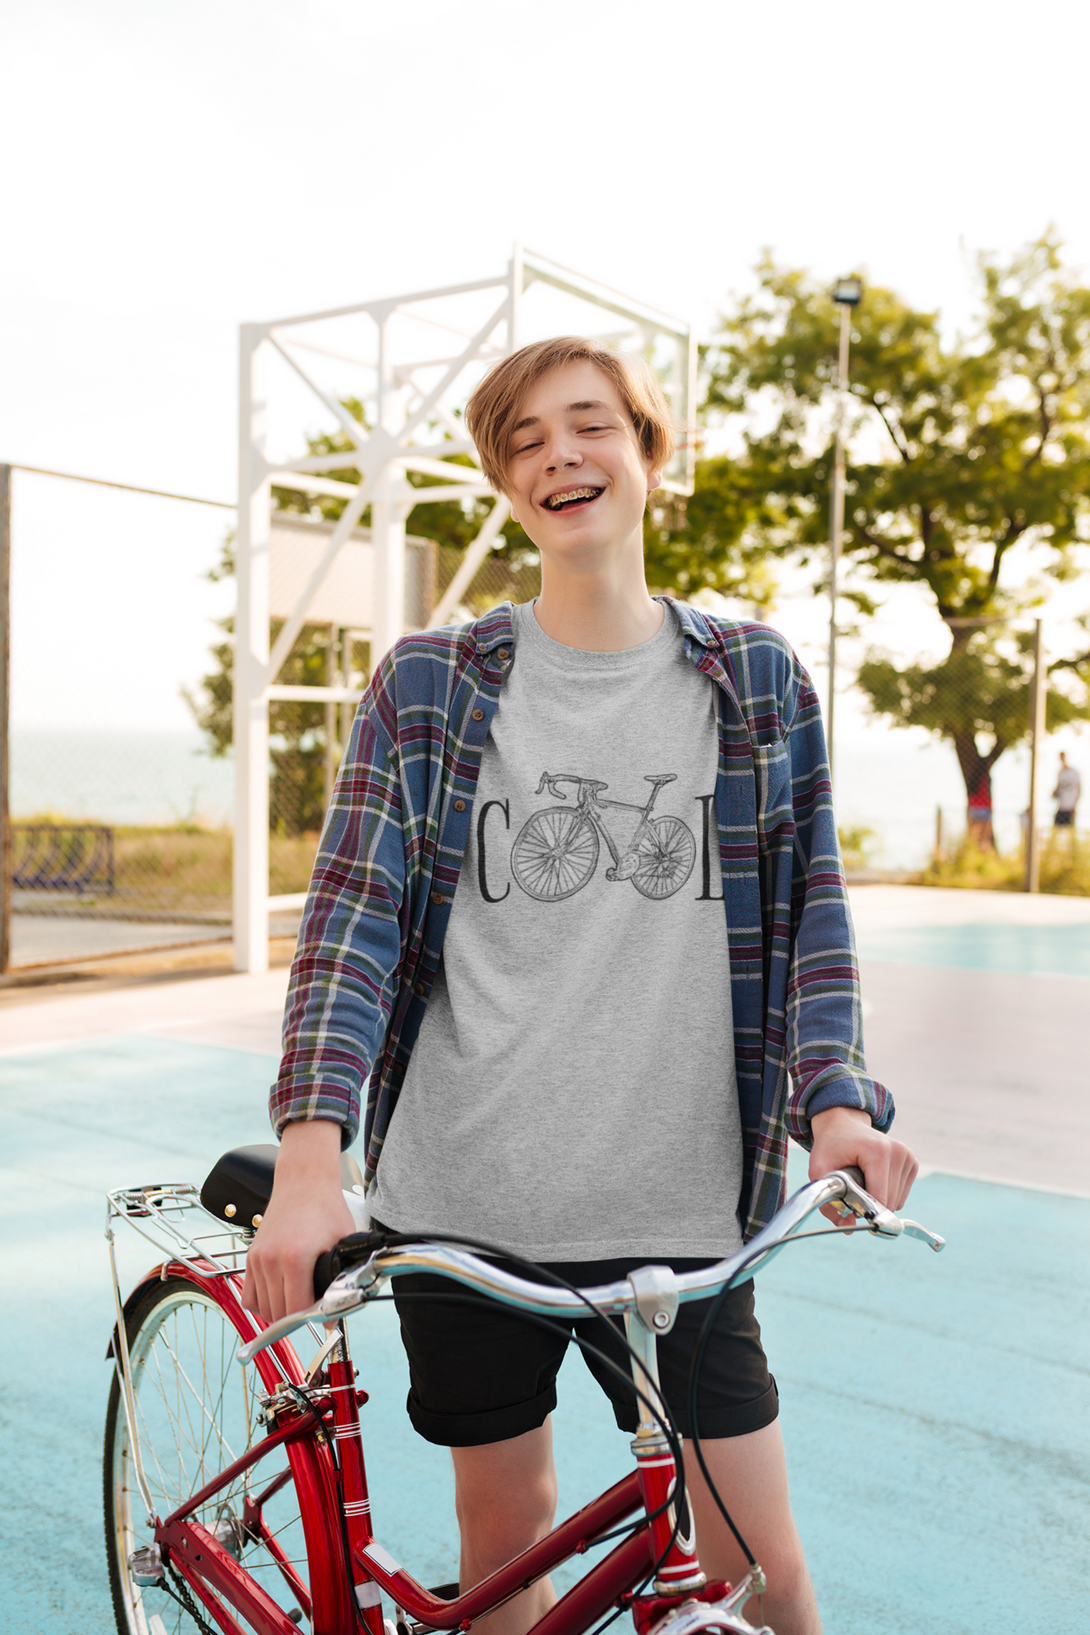 Cycle Coolness Printed T-Shirt For Men - WowWaves - 6